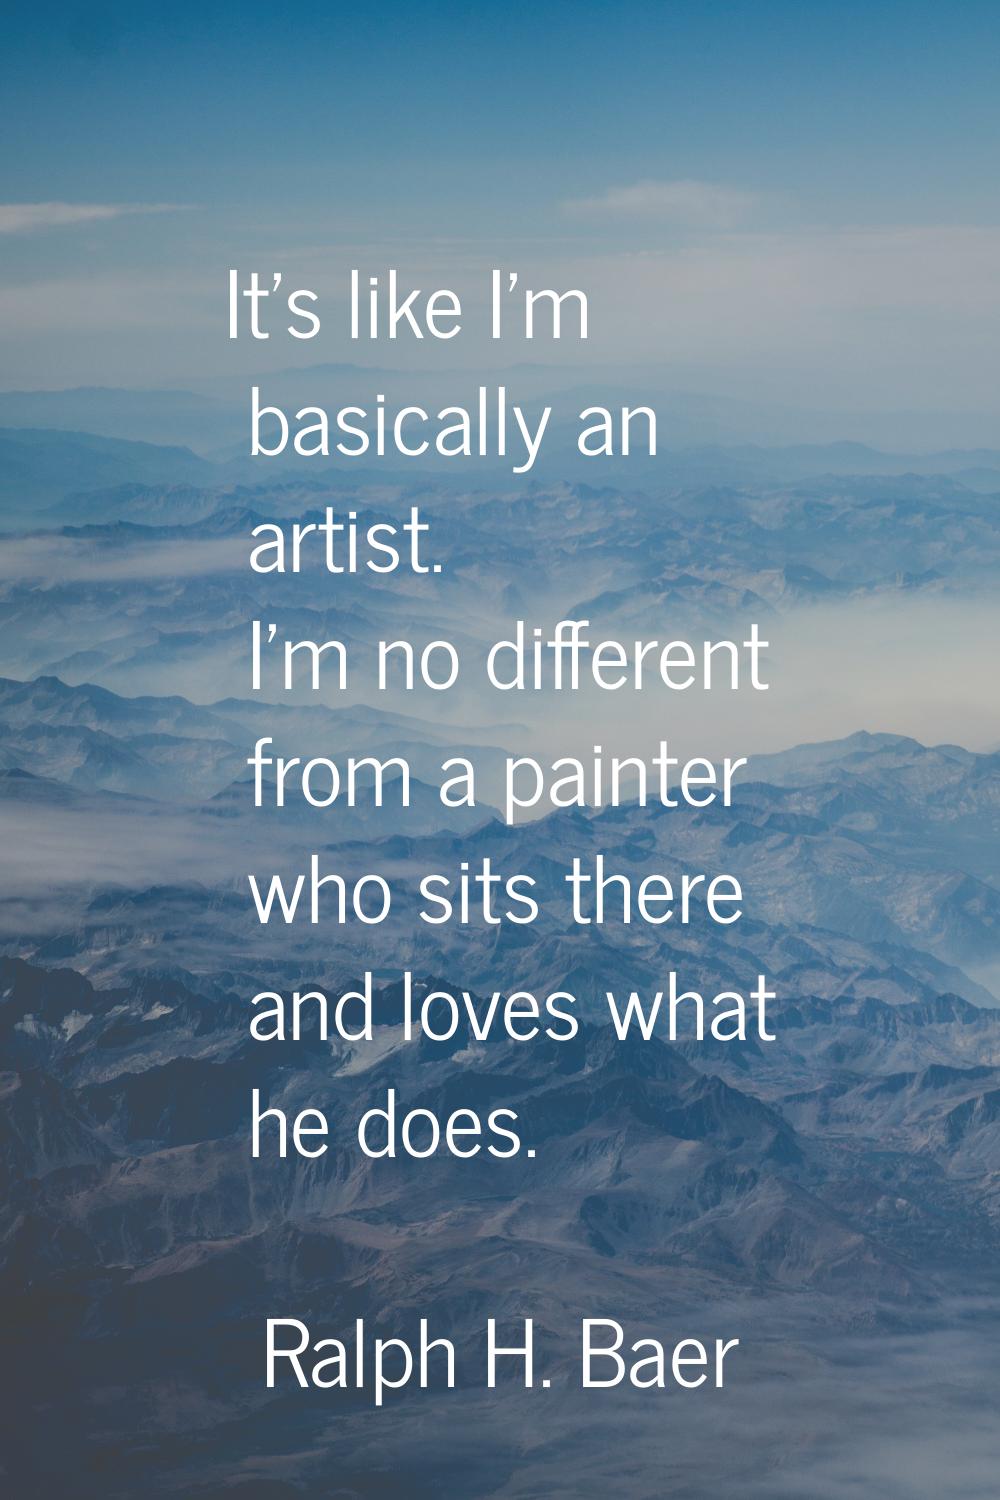 It's like I'm basically an artist. I'm no different from a painter who sits there and loves what he